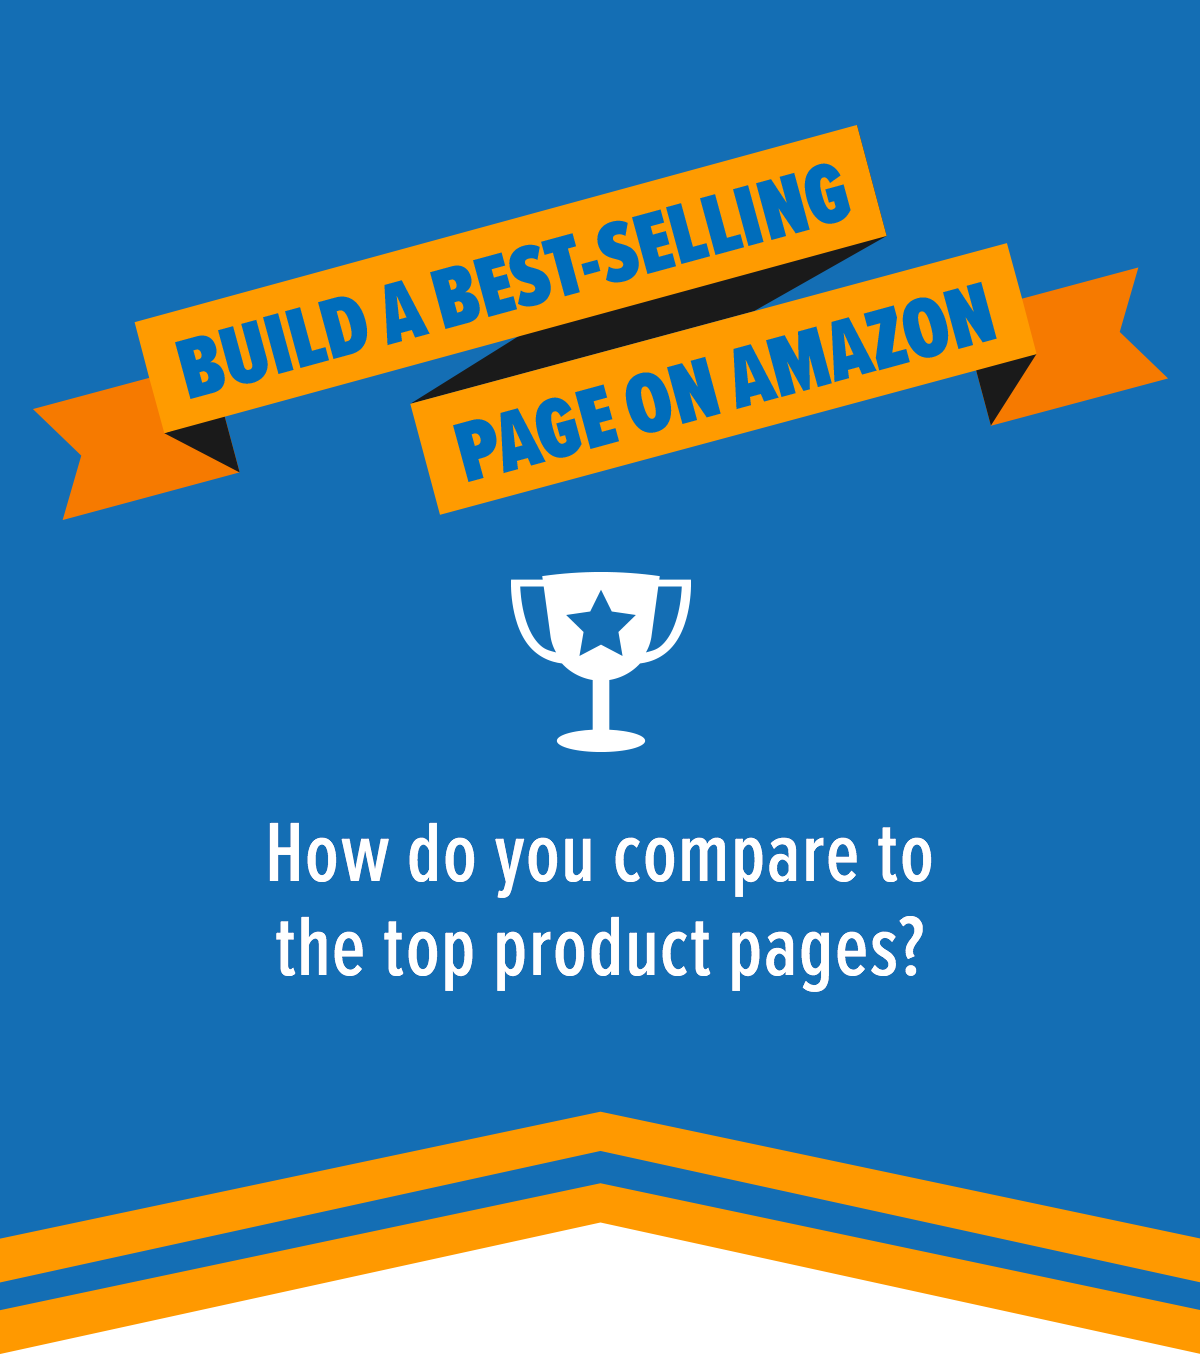 How to Build a Best-Selling Page on Amazon